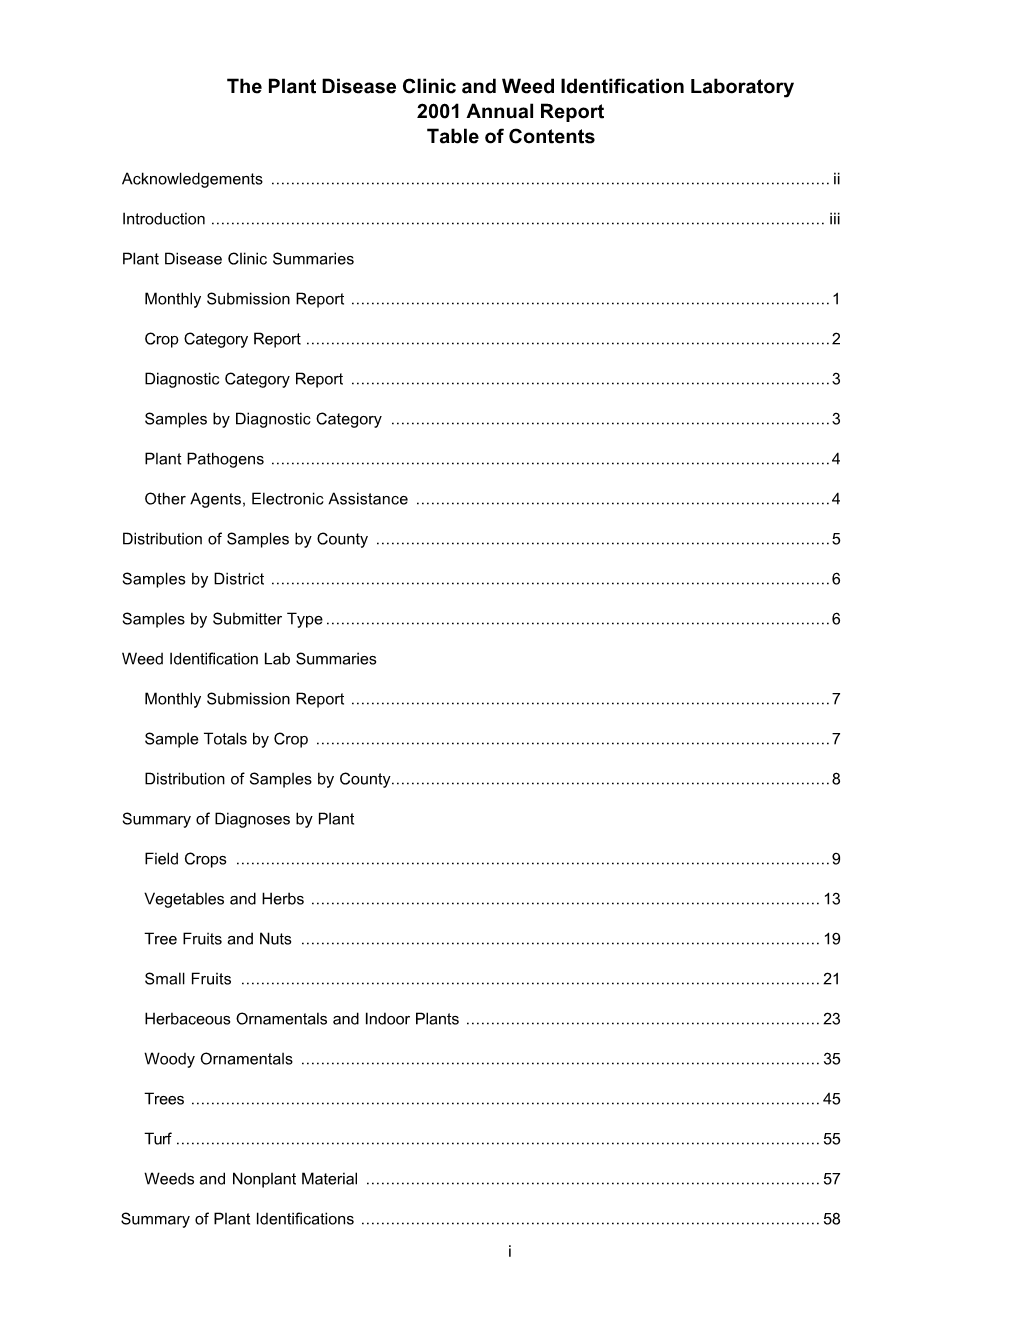 The Plant Disease Clinic and Weed Identification Laboratory 2001 Annual Report Table of Contents